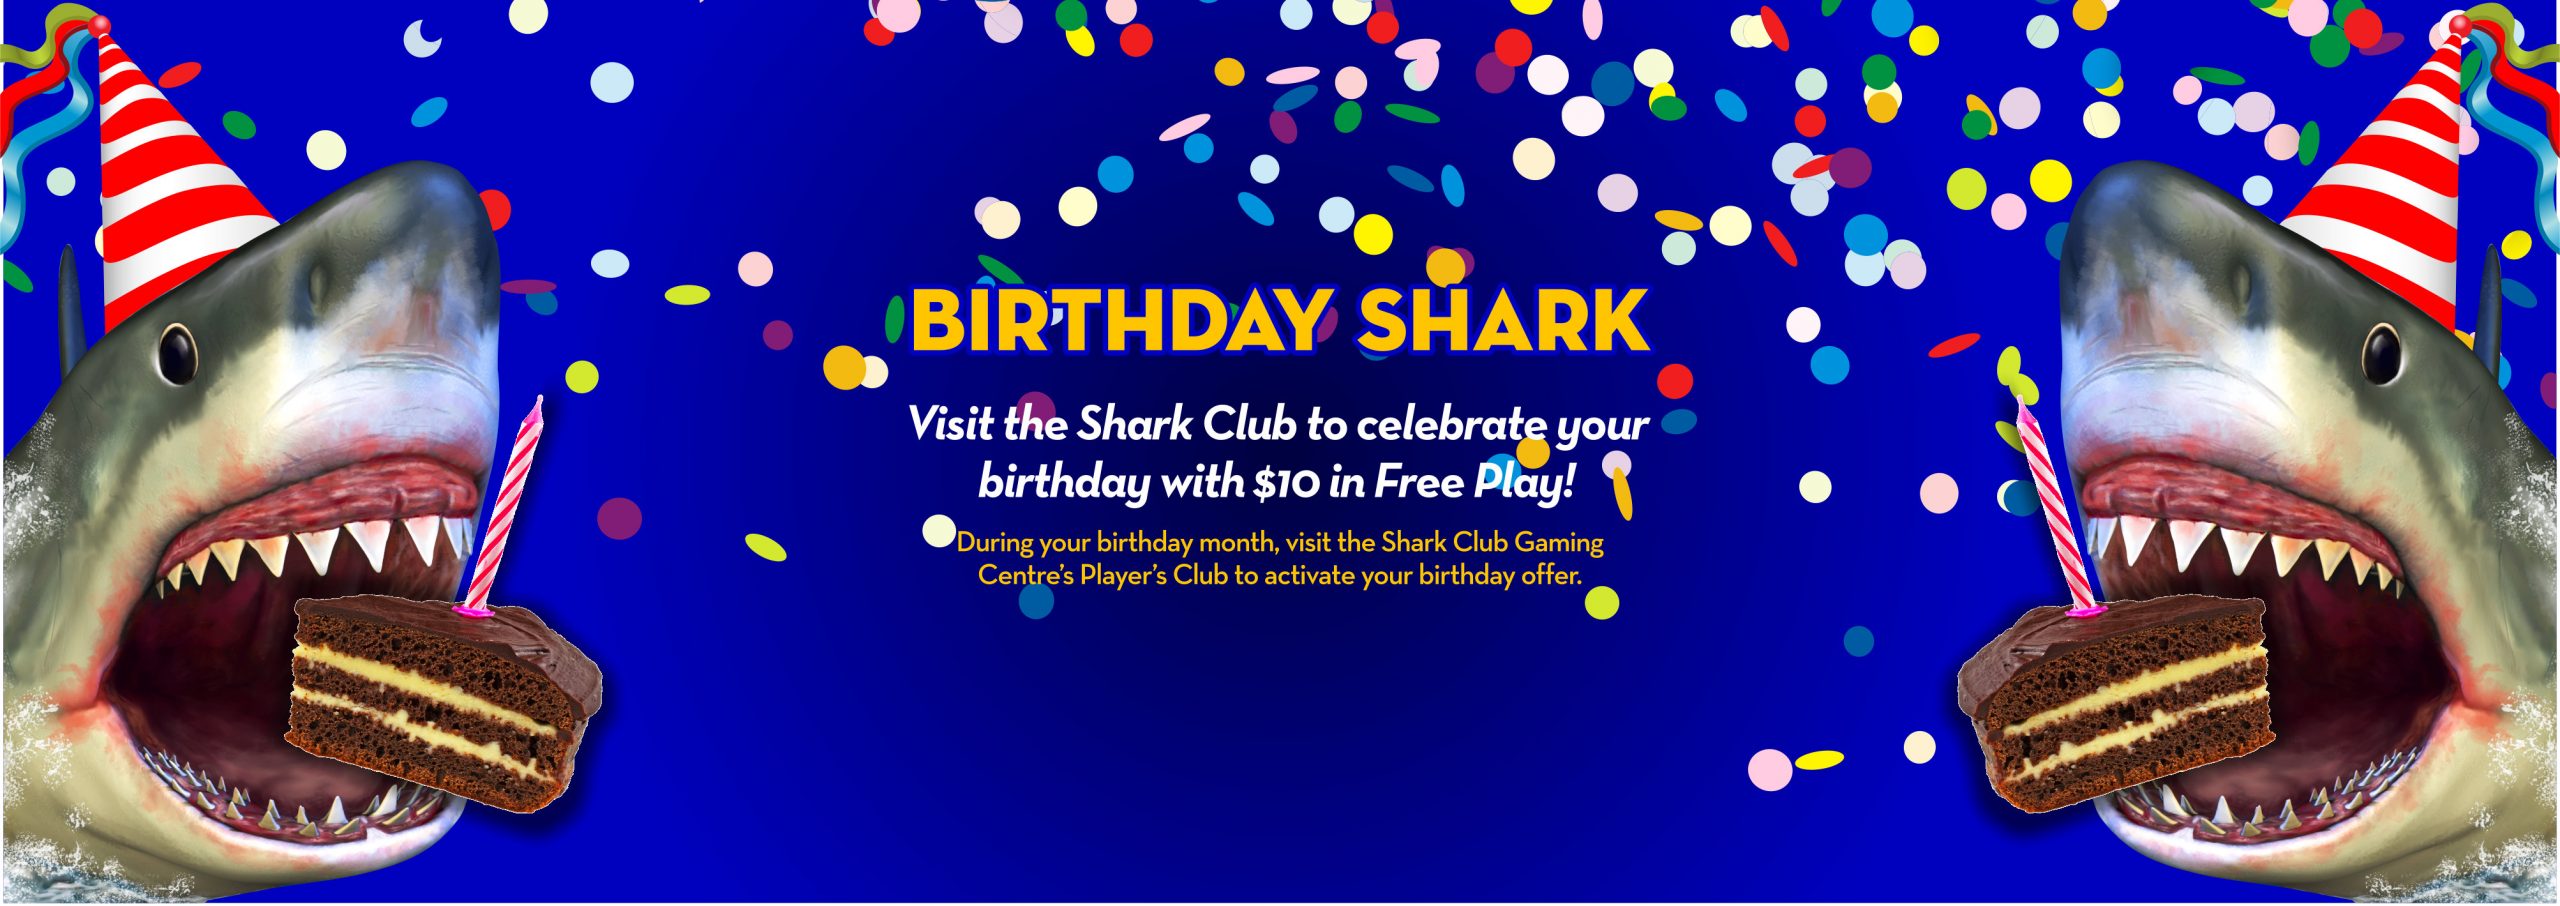 Visit the Shark Club to celebrate your birthday with $10 in Free Play!